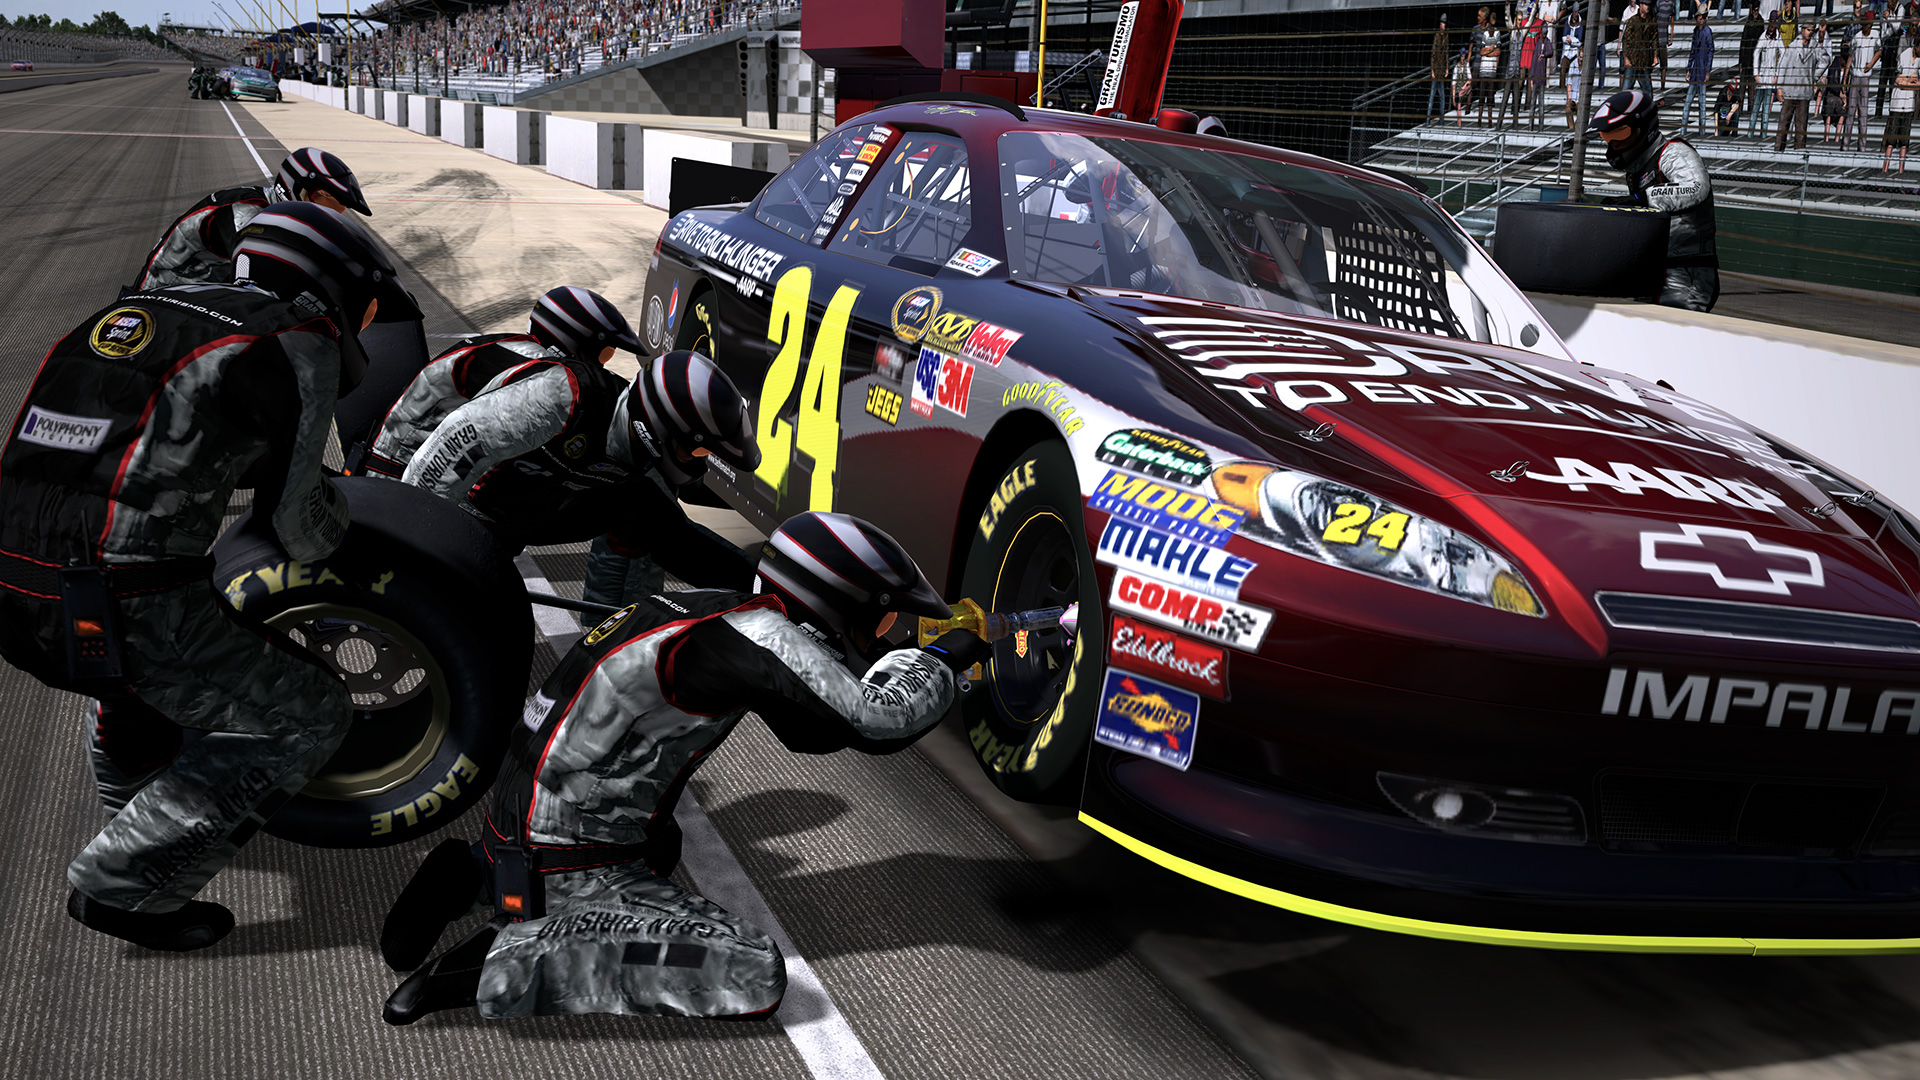 best nascar game for xbox one